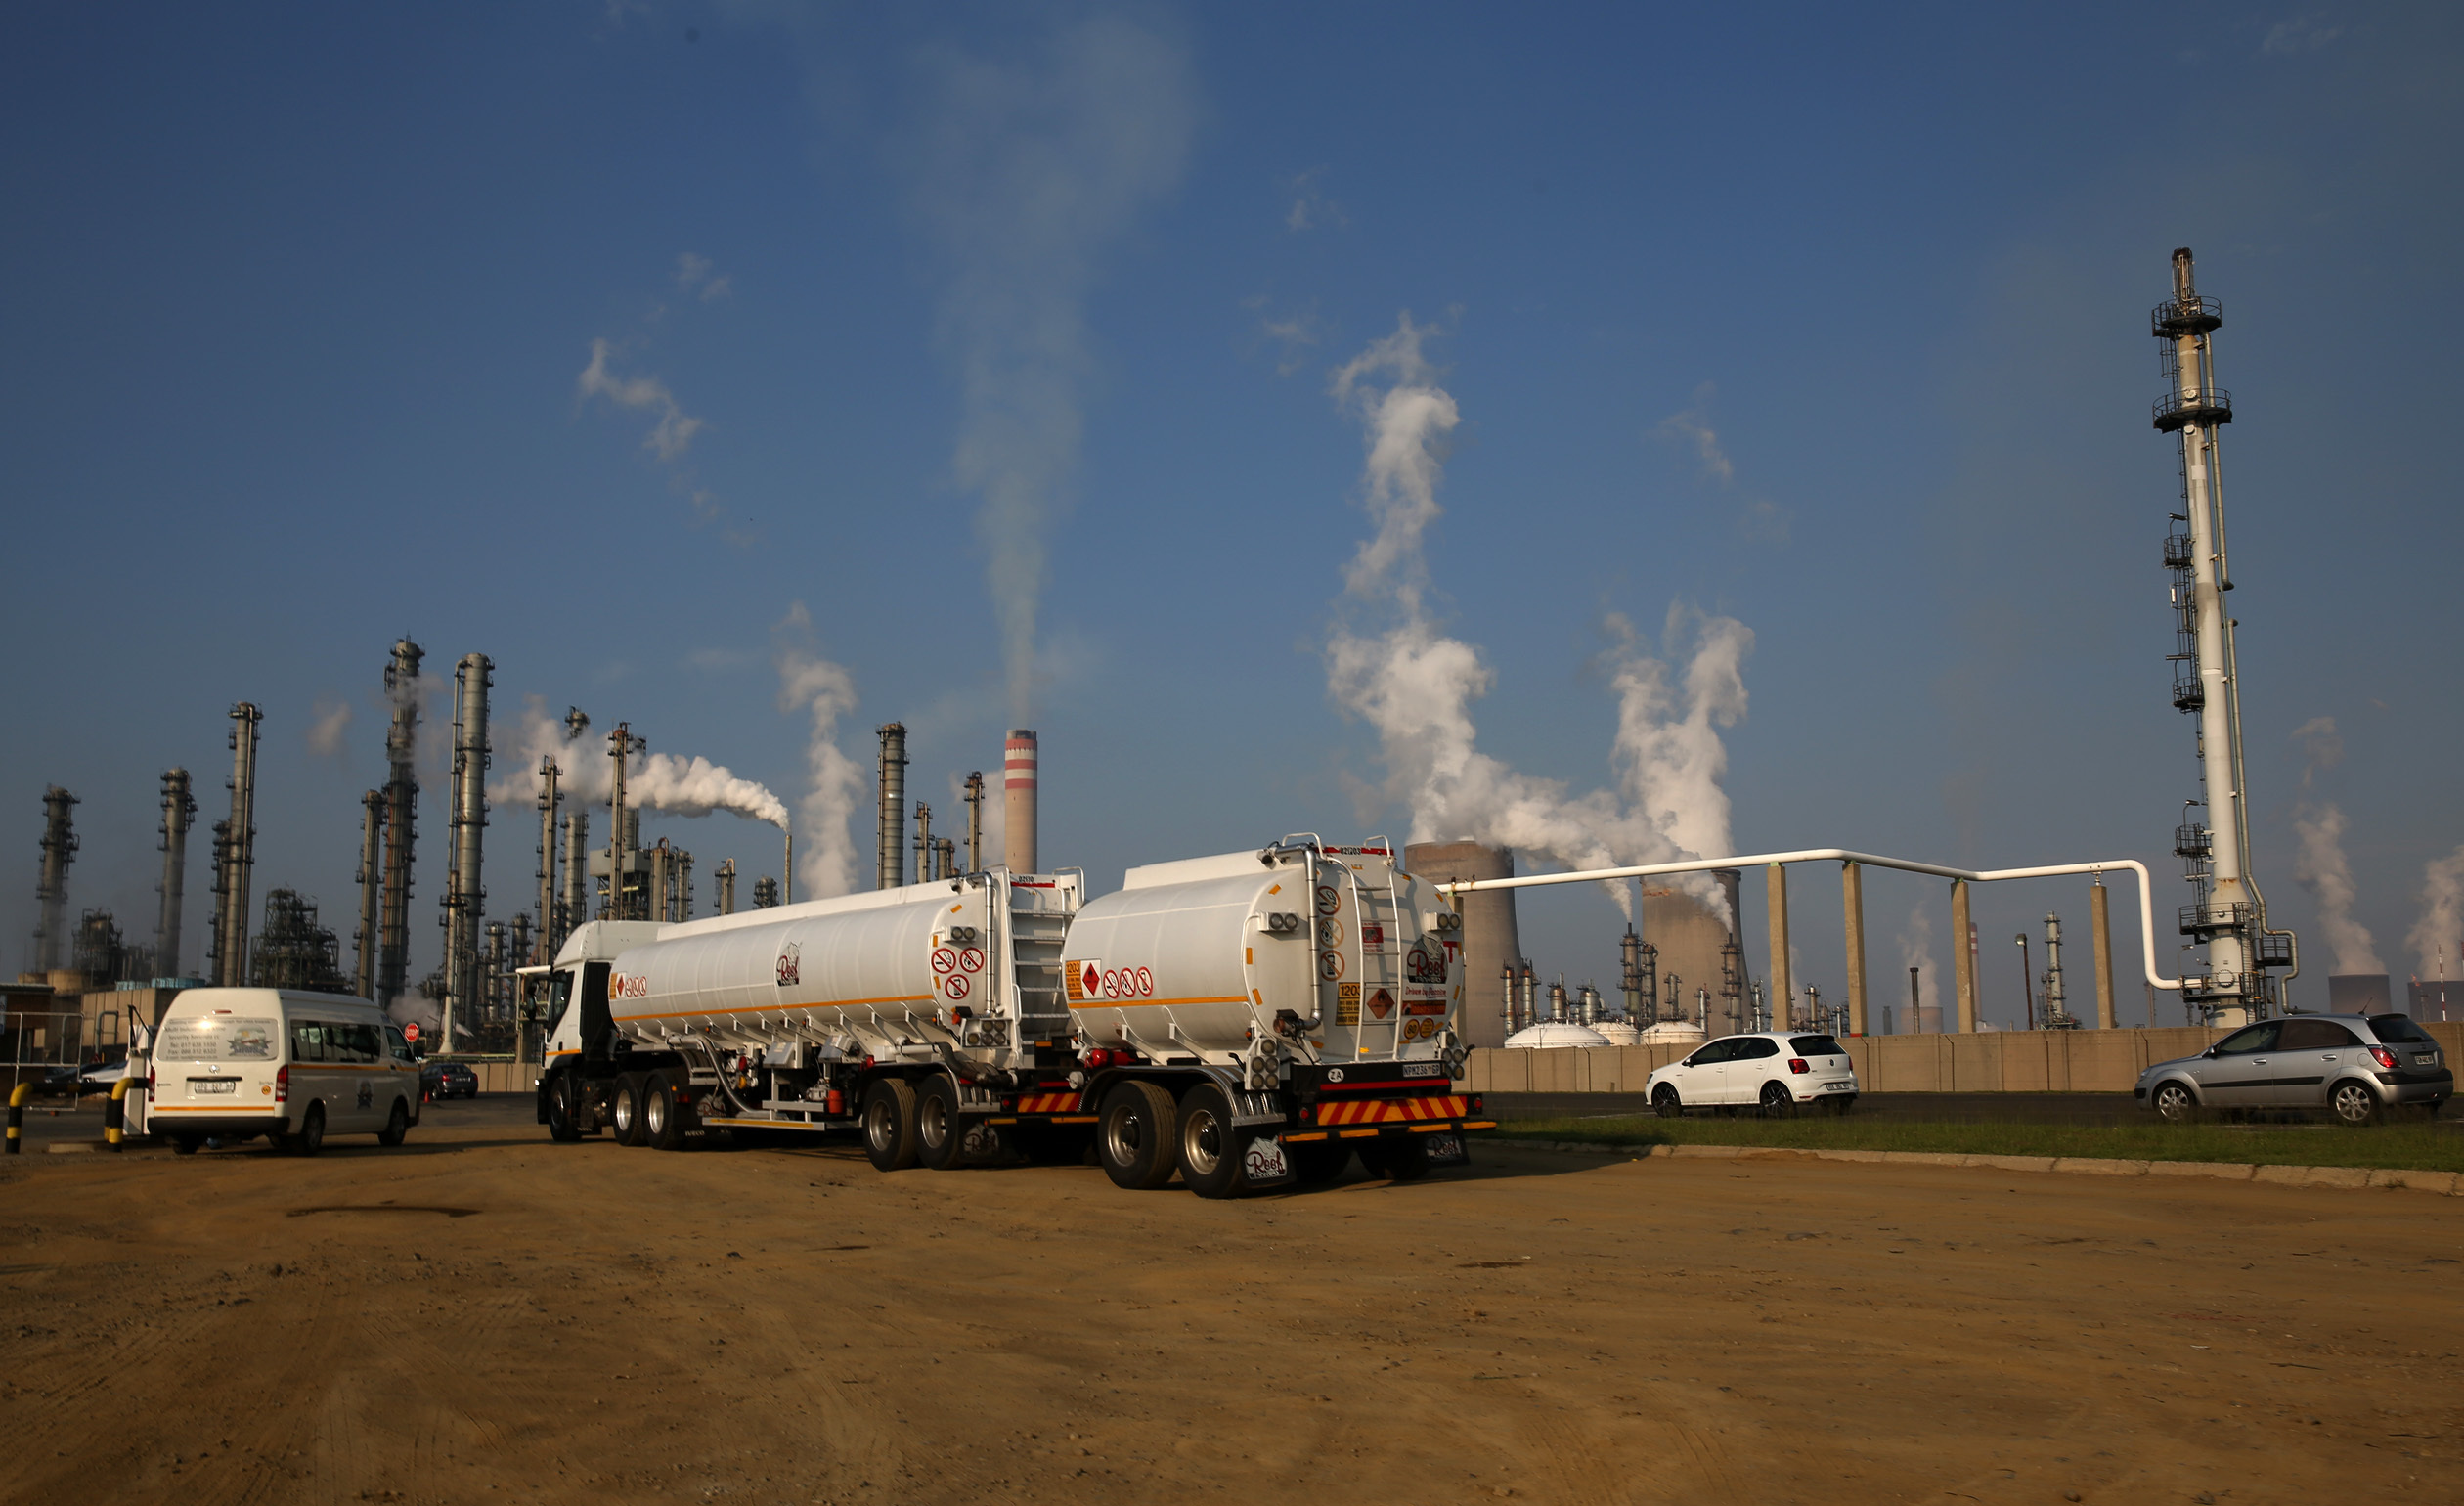 MA truck is seen at South African petro-chemical company Sasol's synthetic fuel plant